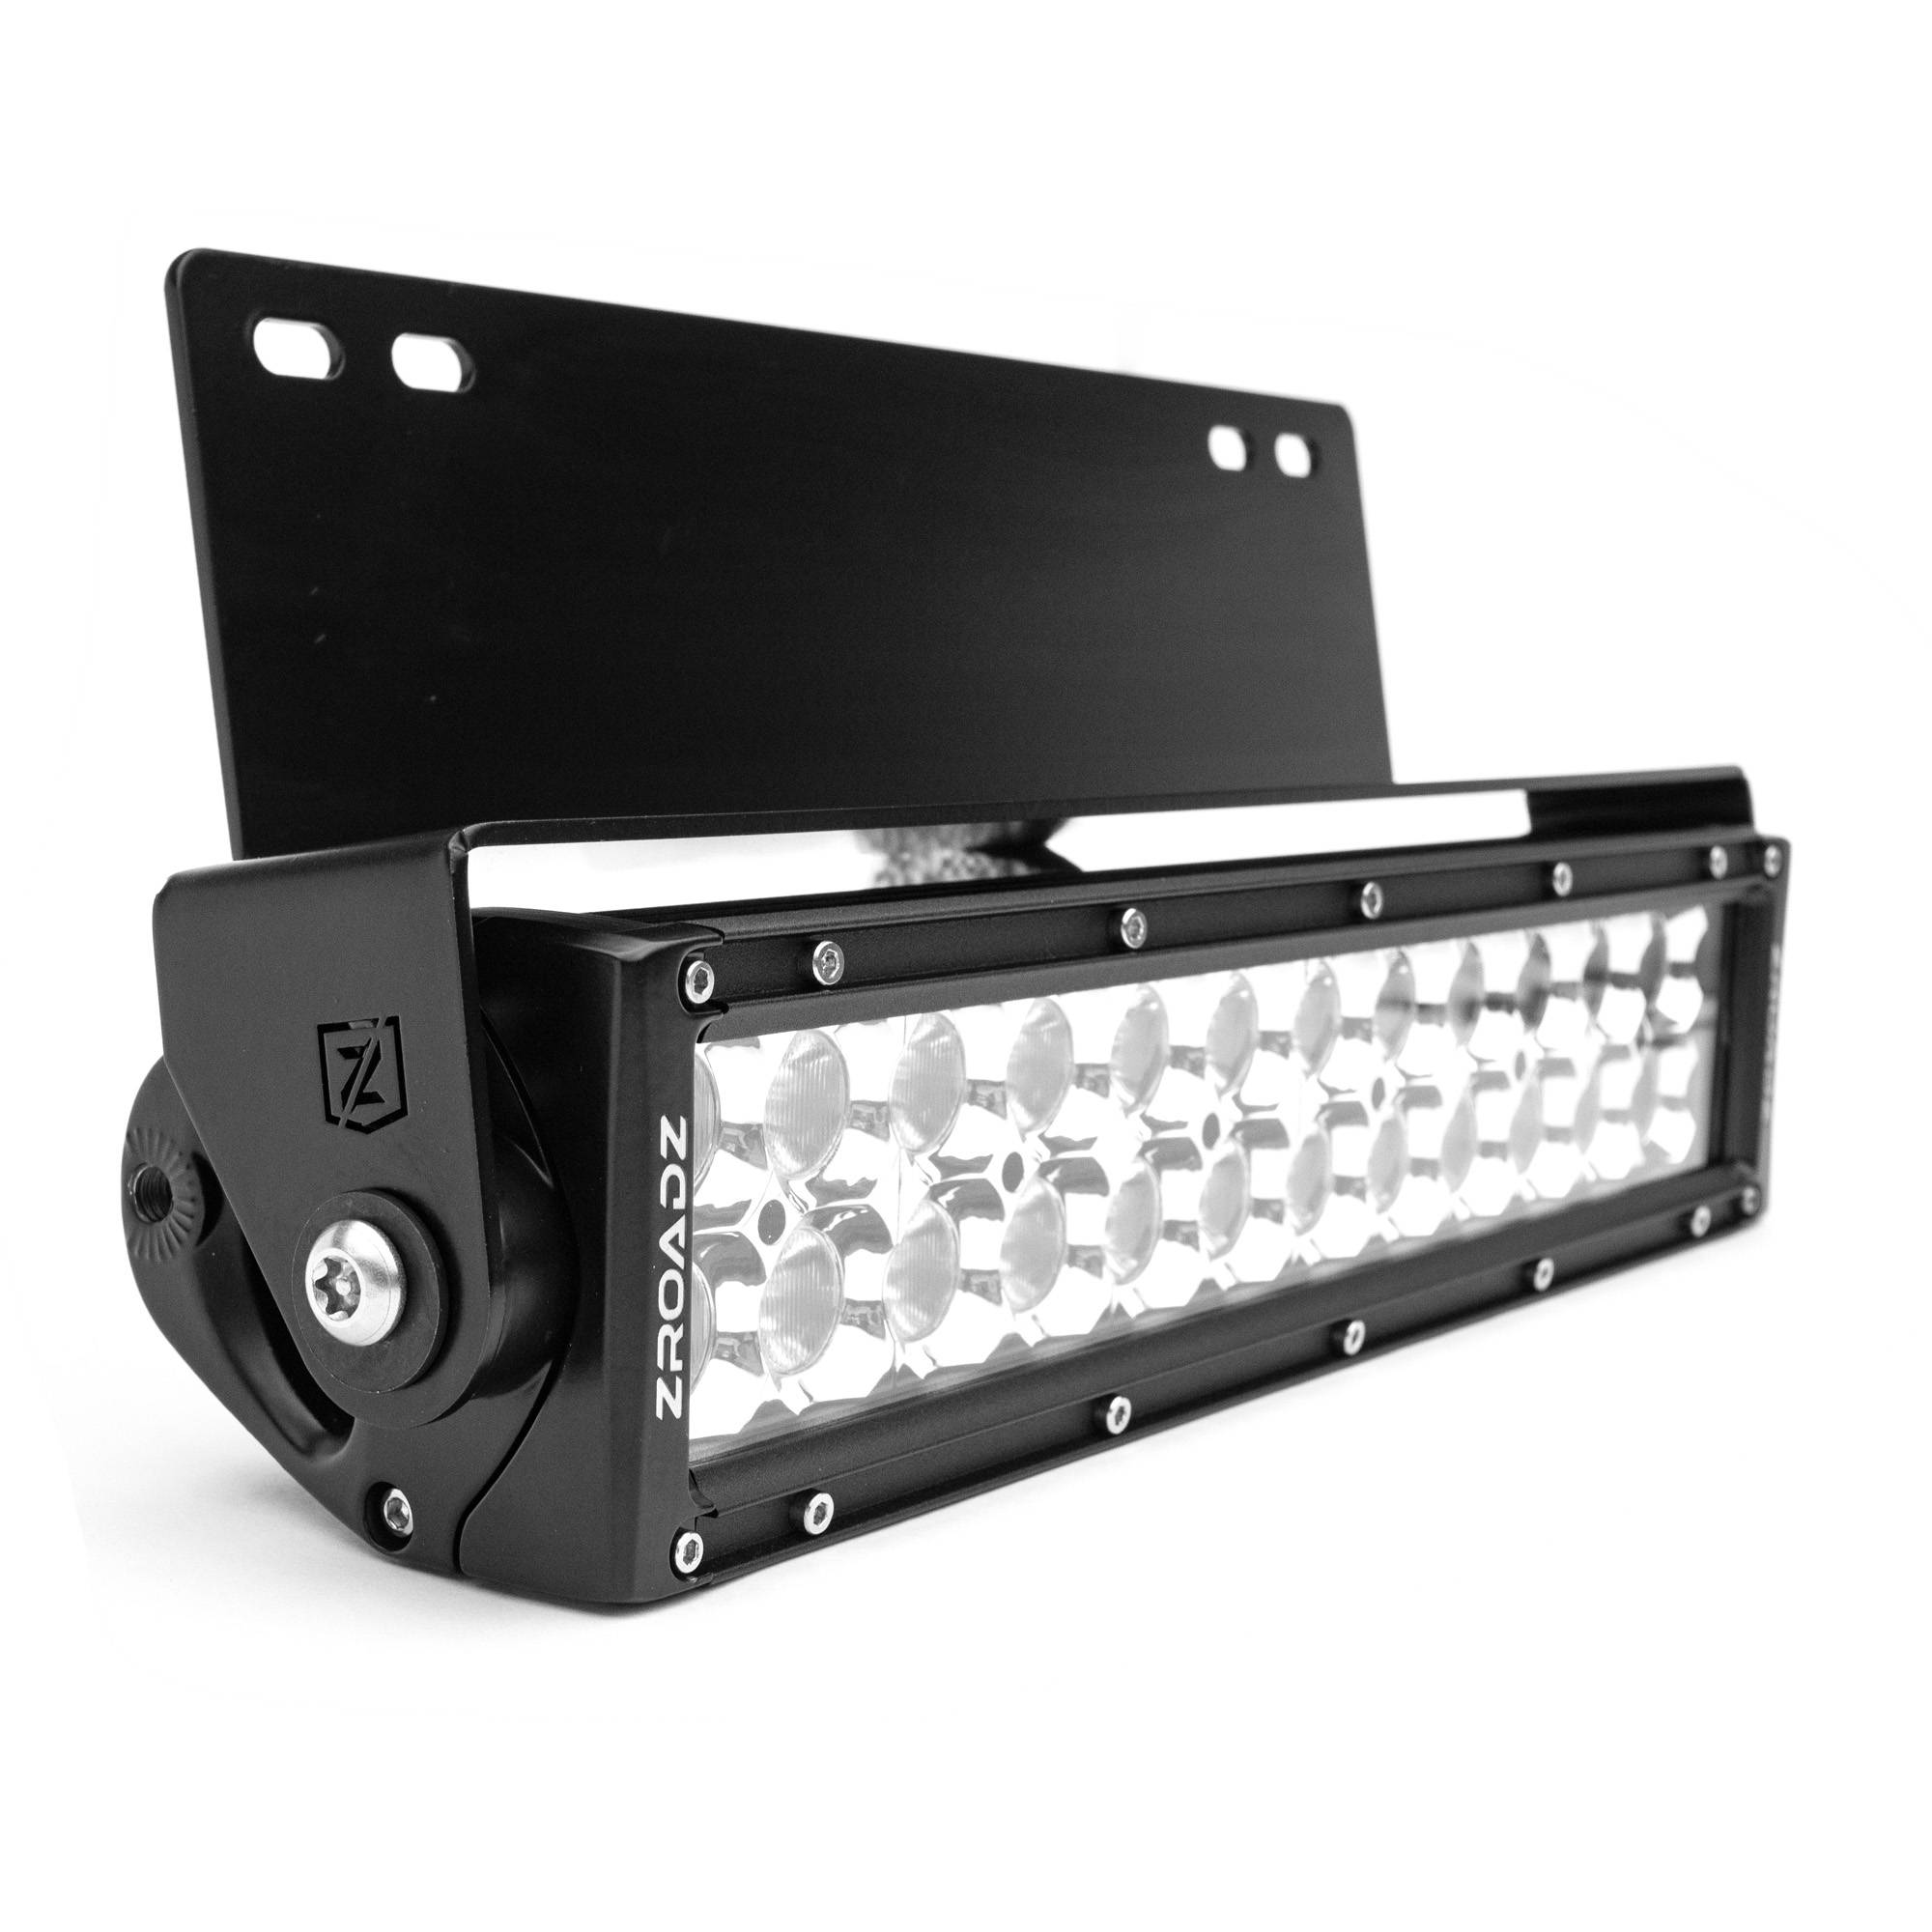 ZROADZ OFF ROAD PRODUCTS - 2020-2022 Ford Super Duty Front Bumper Center LED Kit with (1) 12 Inch LED Straight Double Row Light Bar - PN #Z325571-KIT